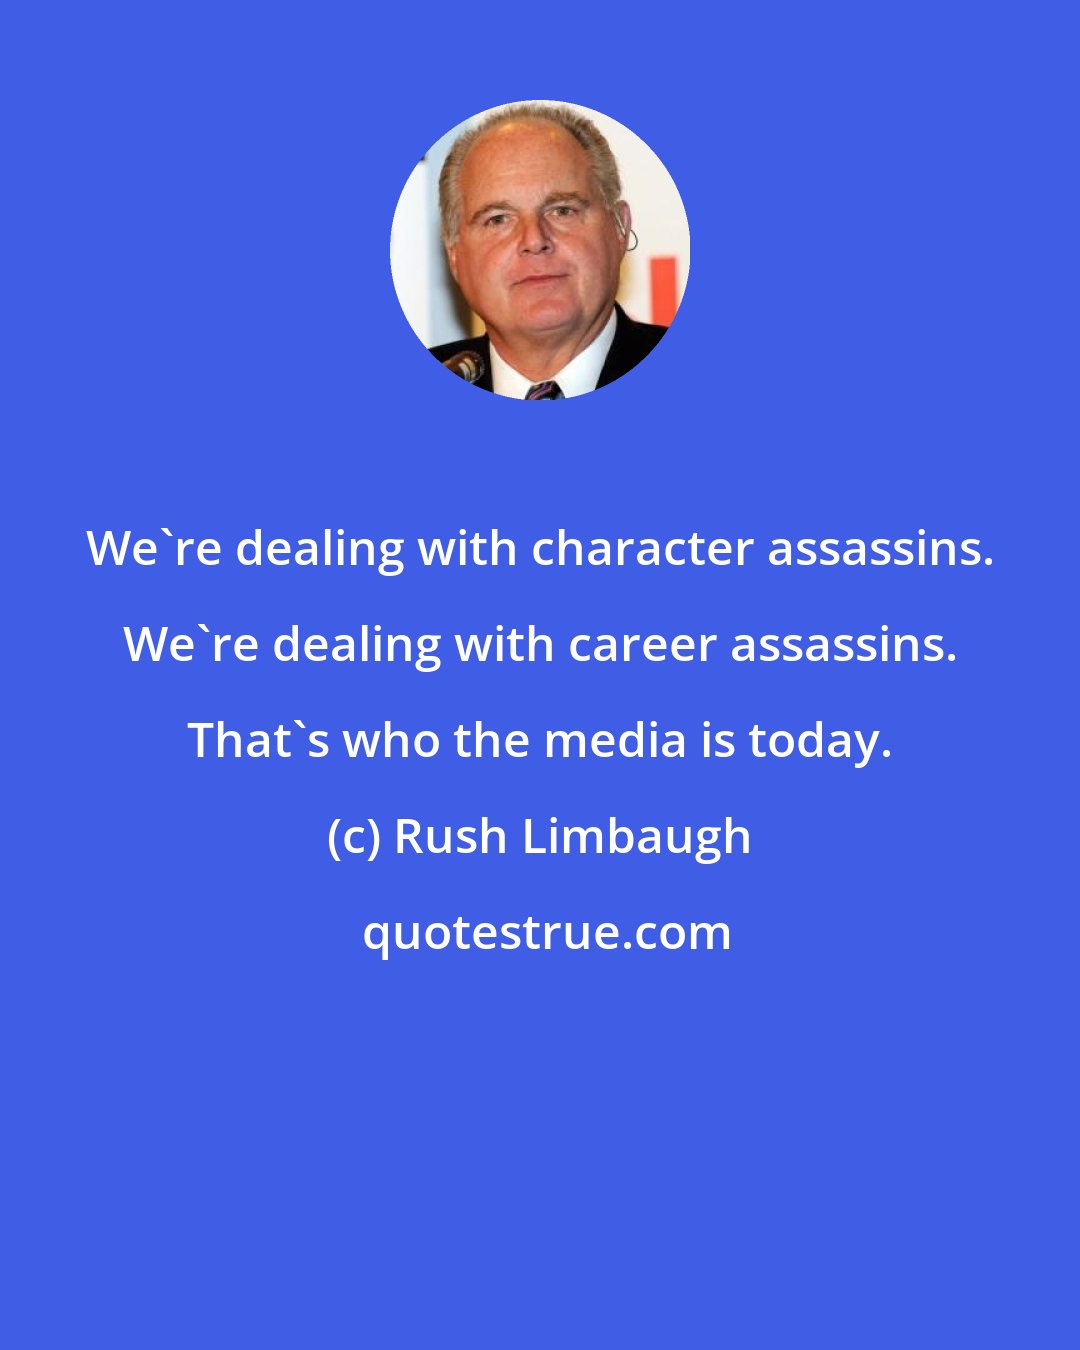 Rush Limbaugh: We're dealing with character assassins. We're dealing with career assassins. That's who the media is today.